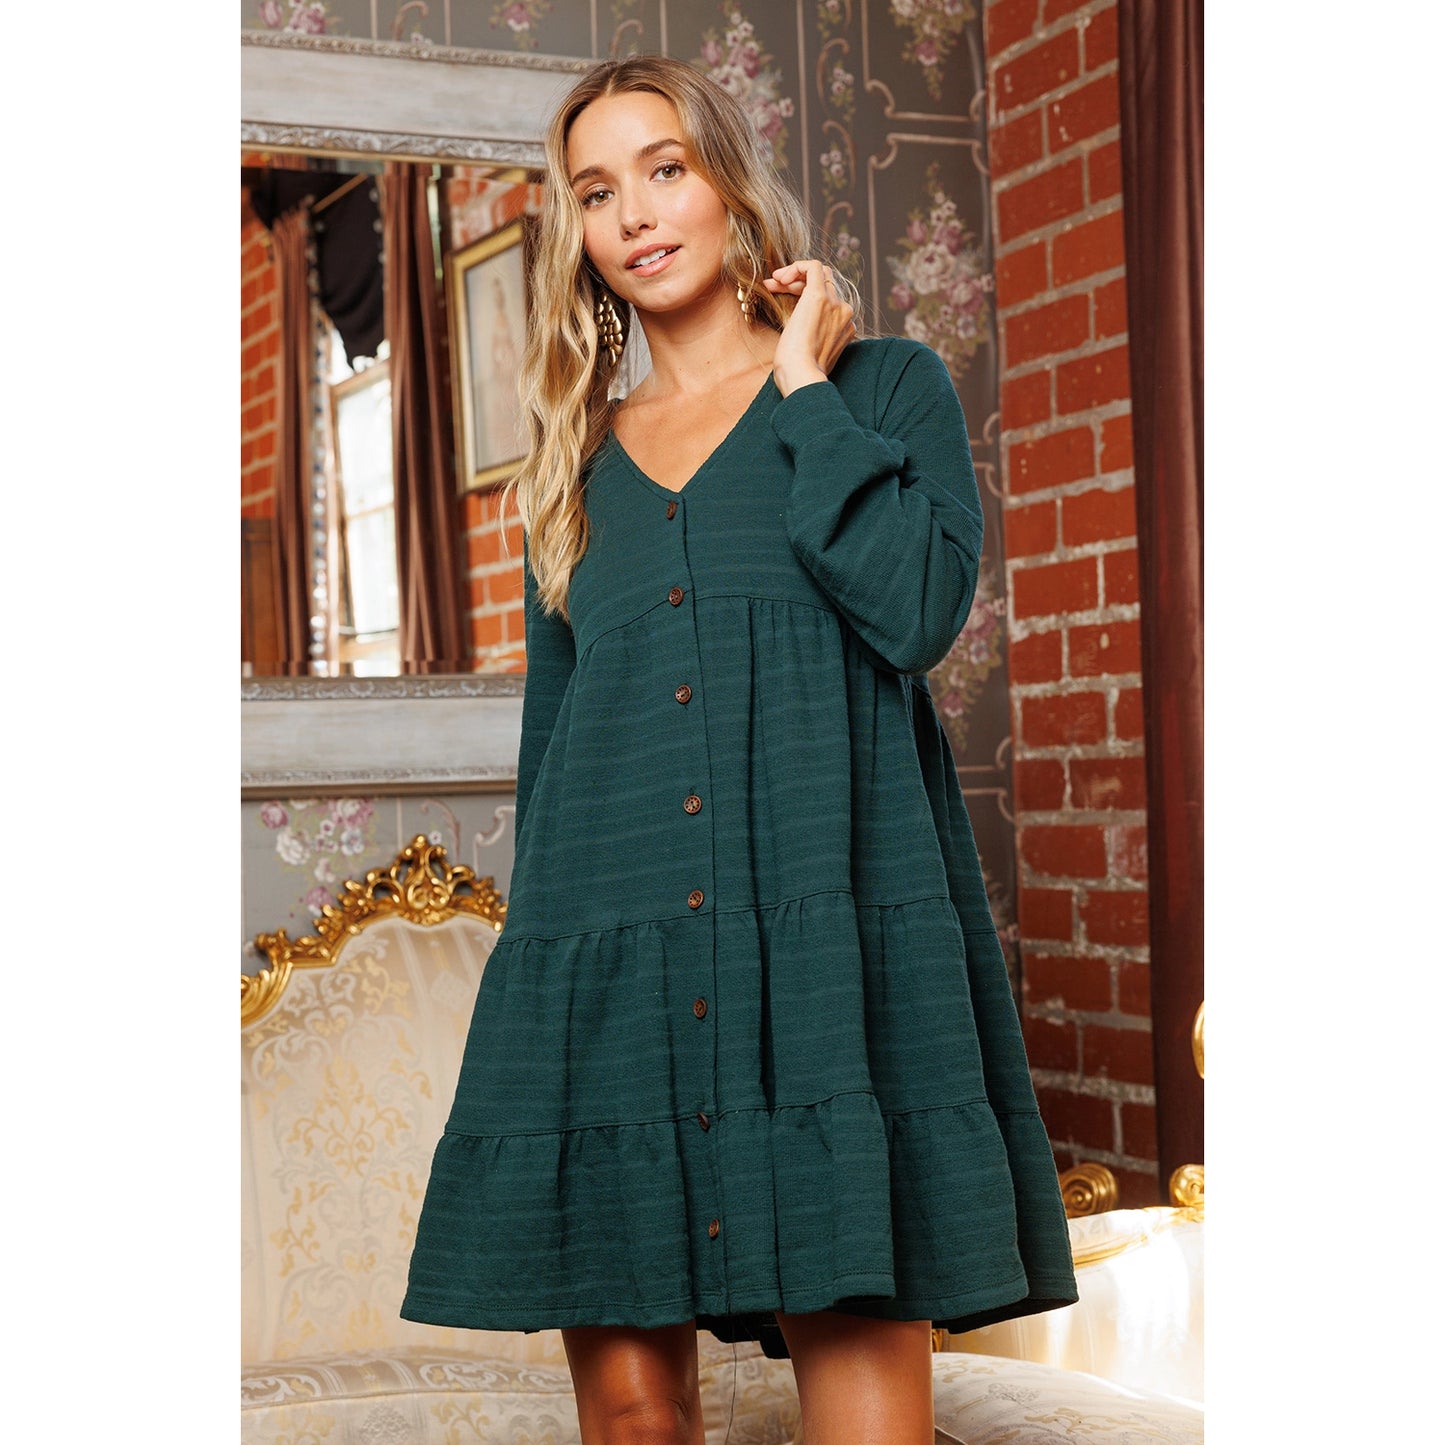 Evergreen Waves Textured Solid Tire Dress